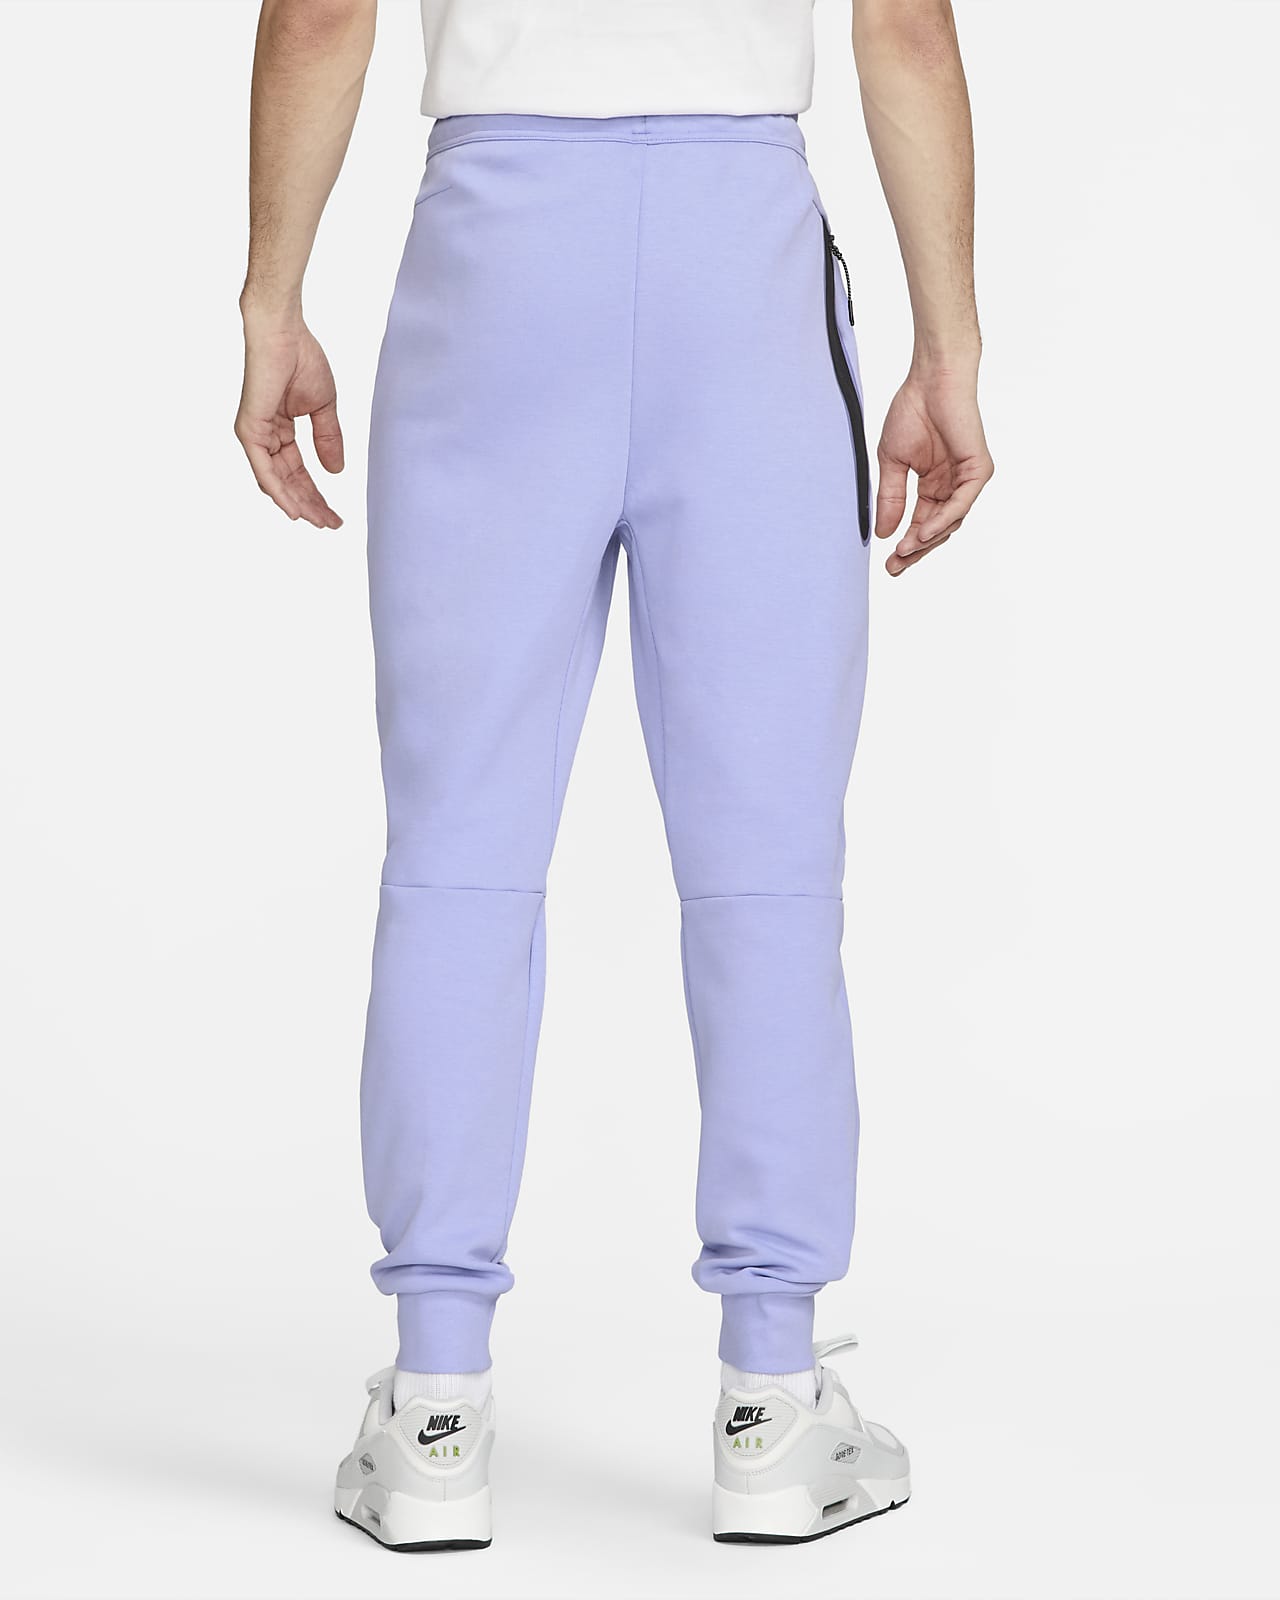 Mixed Material Track Pants - Men - Ready-to-Wear